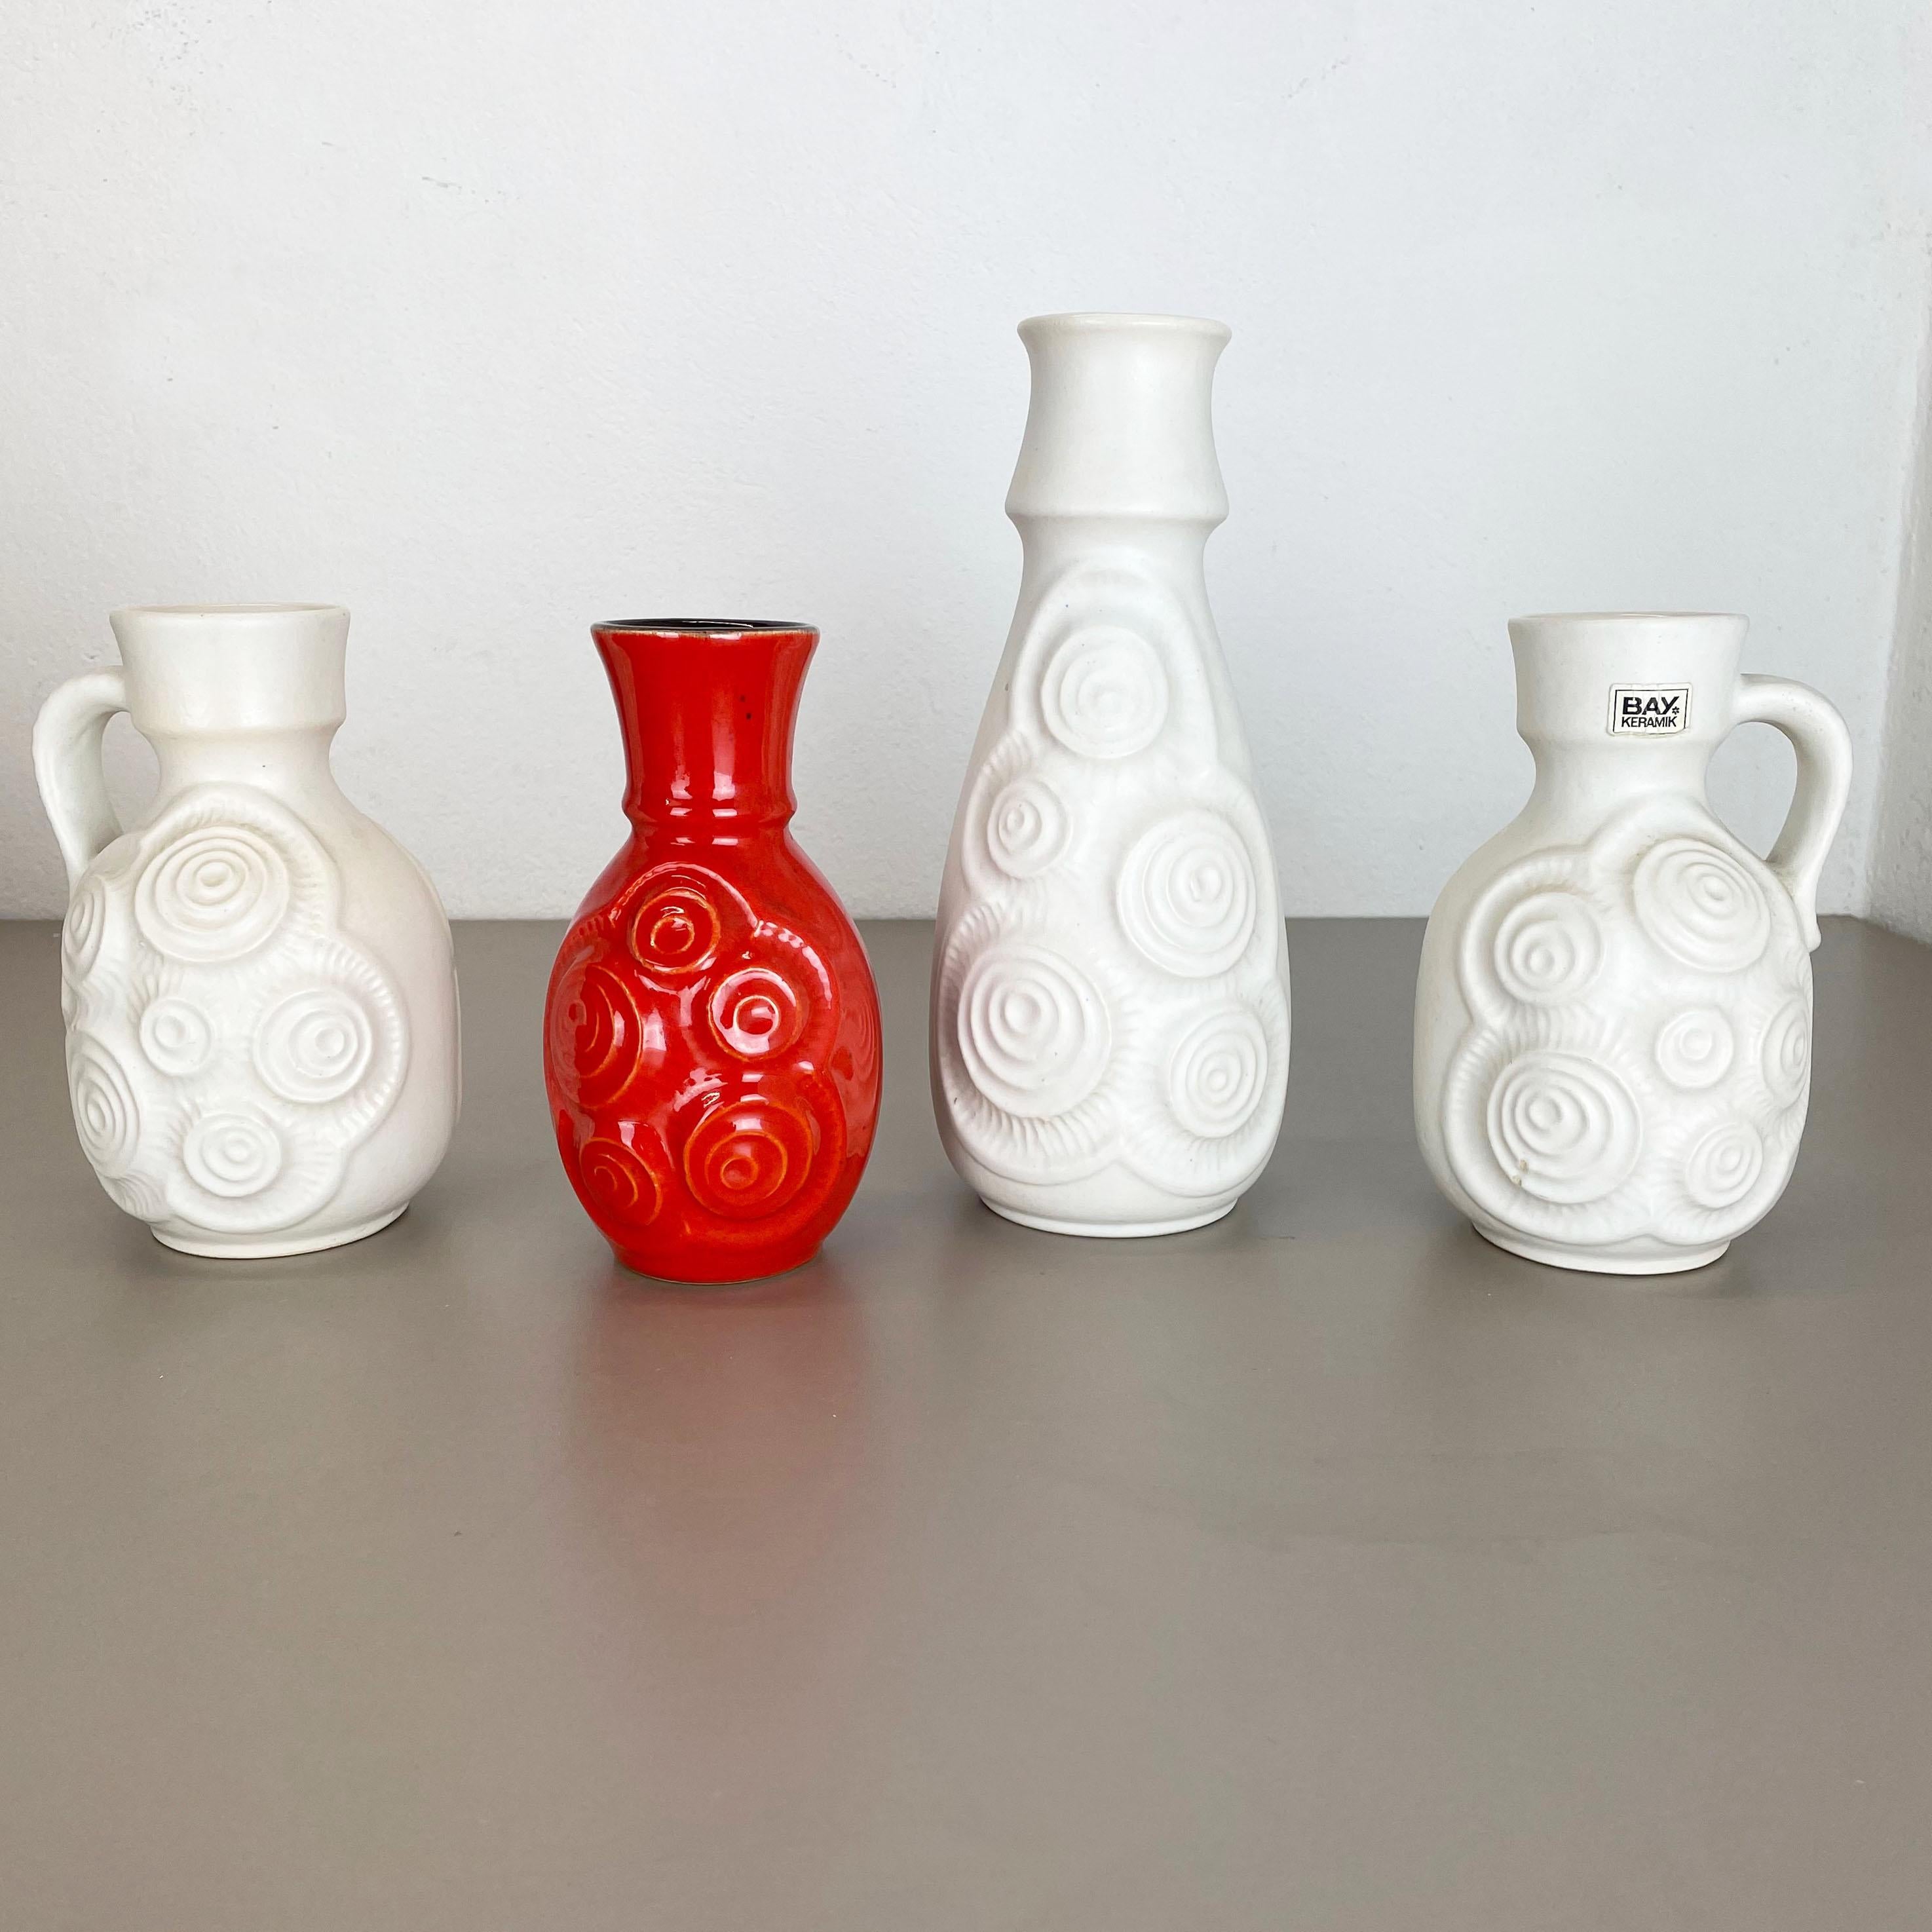 Article:

Pottery ceramic vase set of 2


Producer:

BAY Ceramic, Germany


Decade:

1970s



Description:

Set of 4 original vintage 1960s pottery ceramic vase made in Germany. High quality German production with a nice abstract